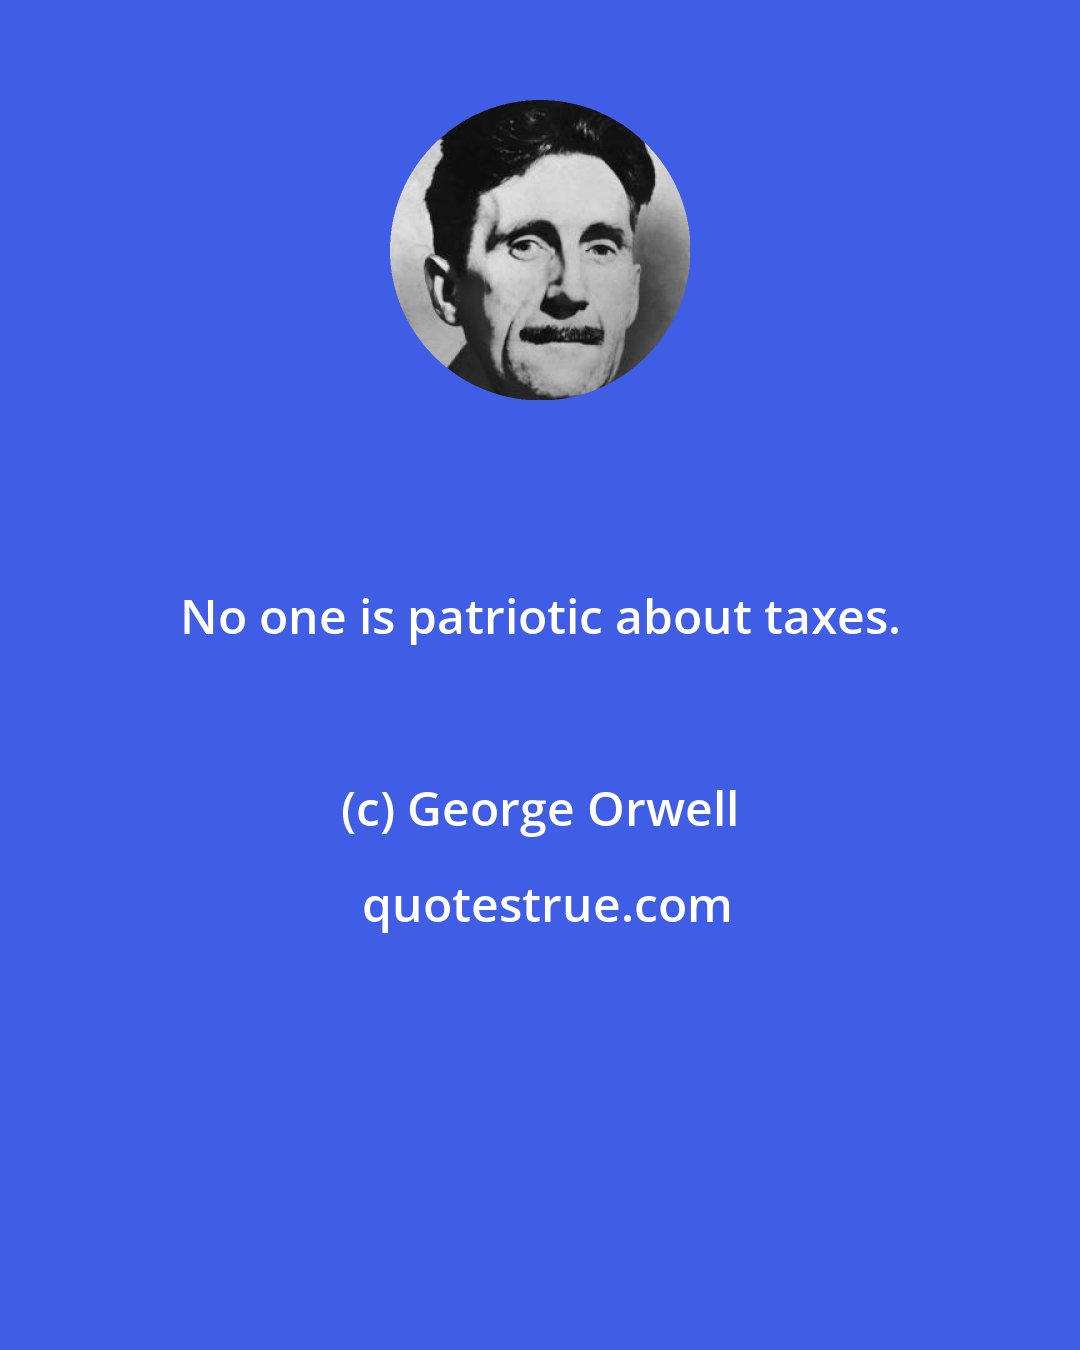 George Orwell: No one is patriotic about taxes.